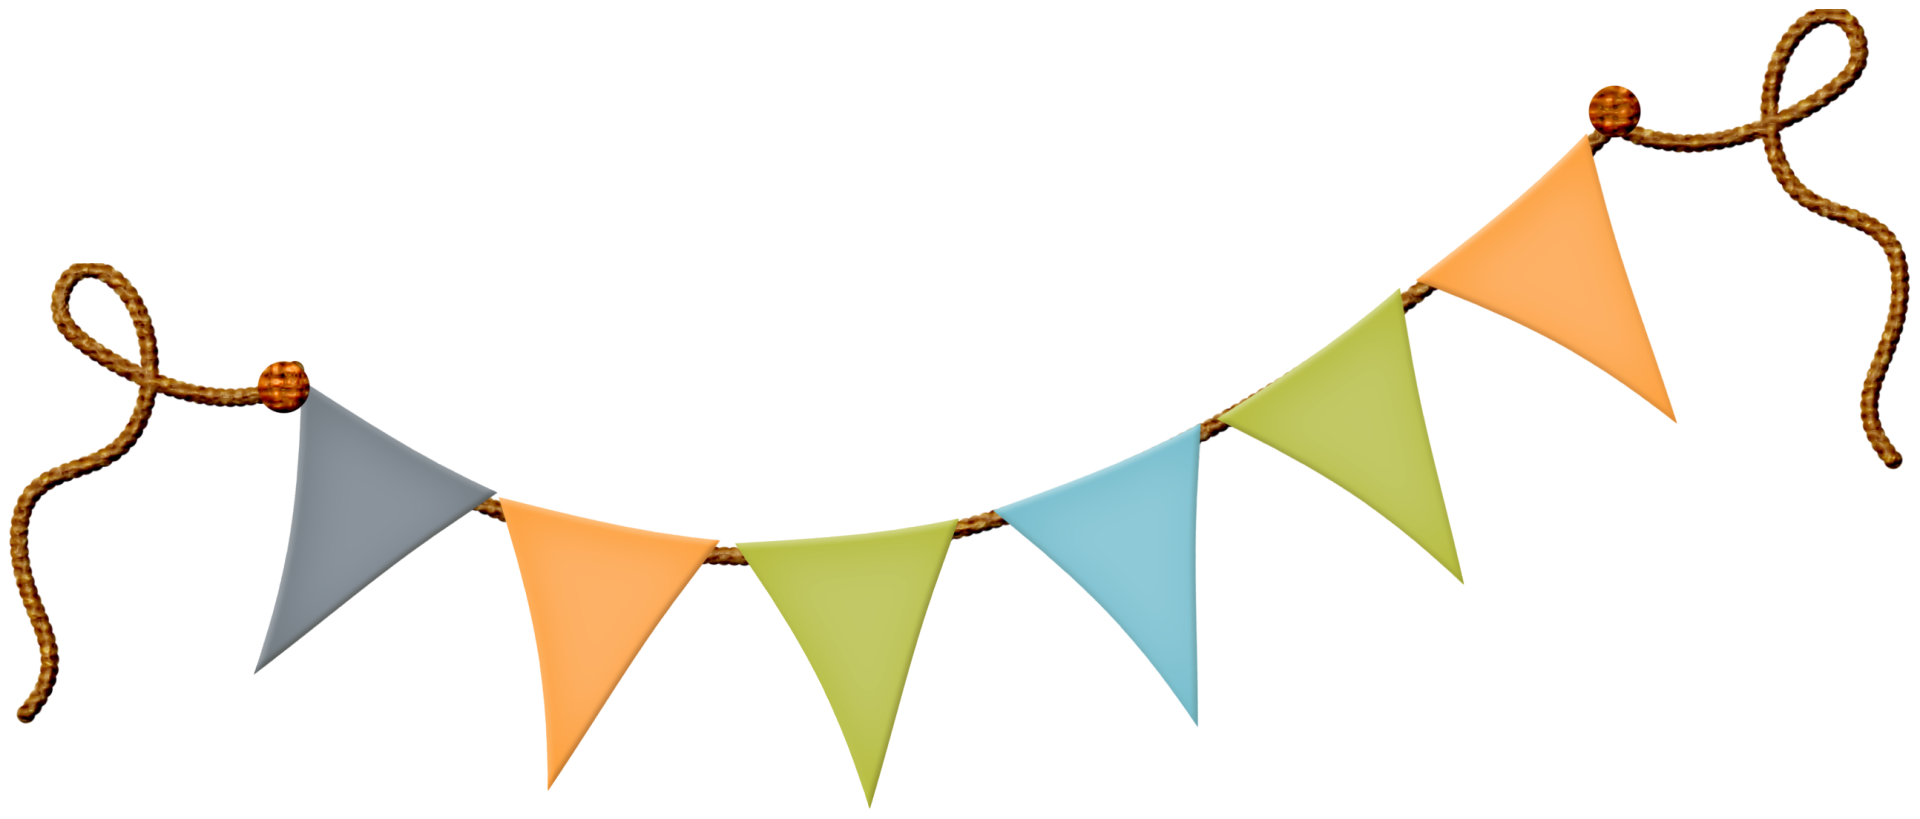 streamers clipart bunting